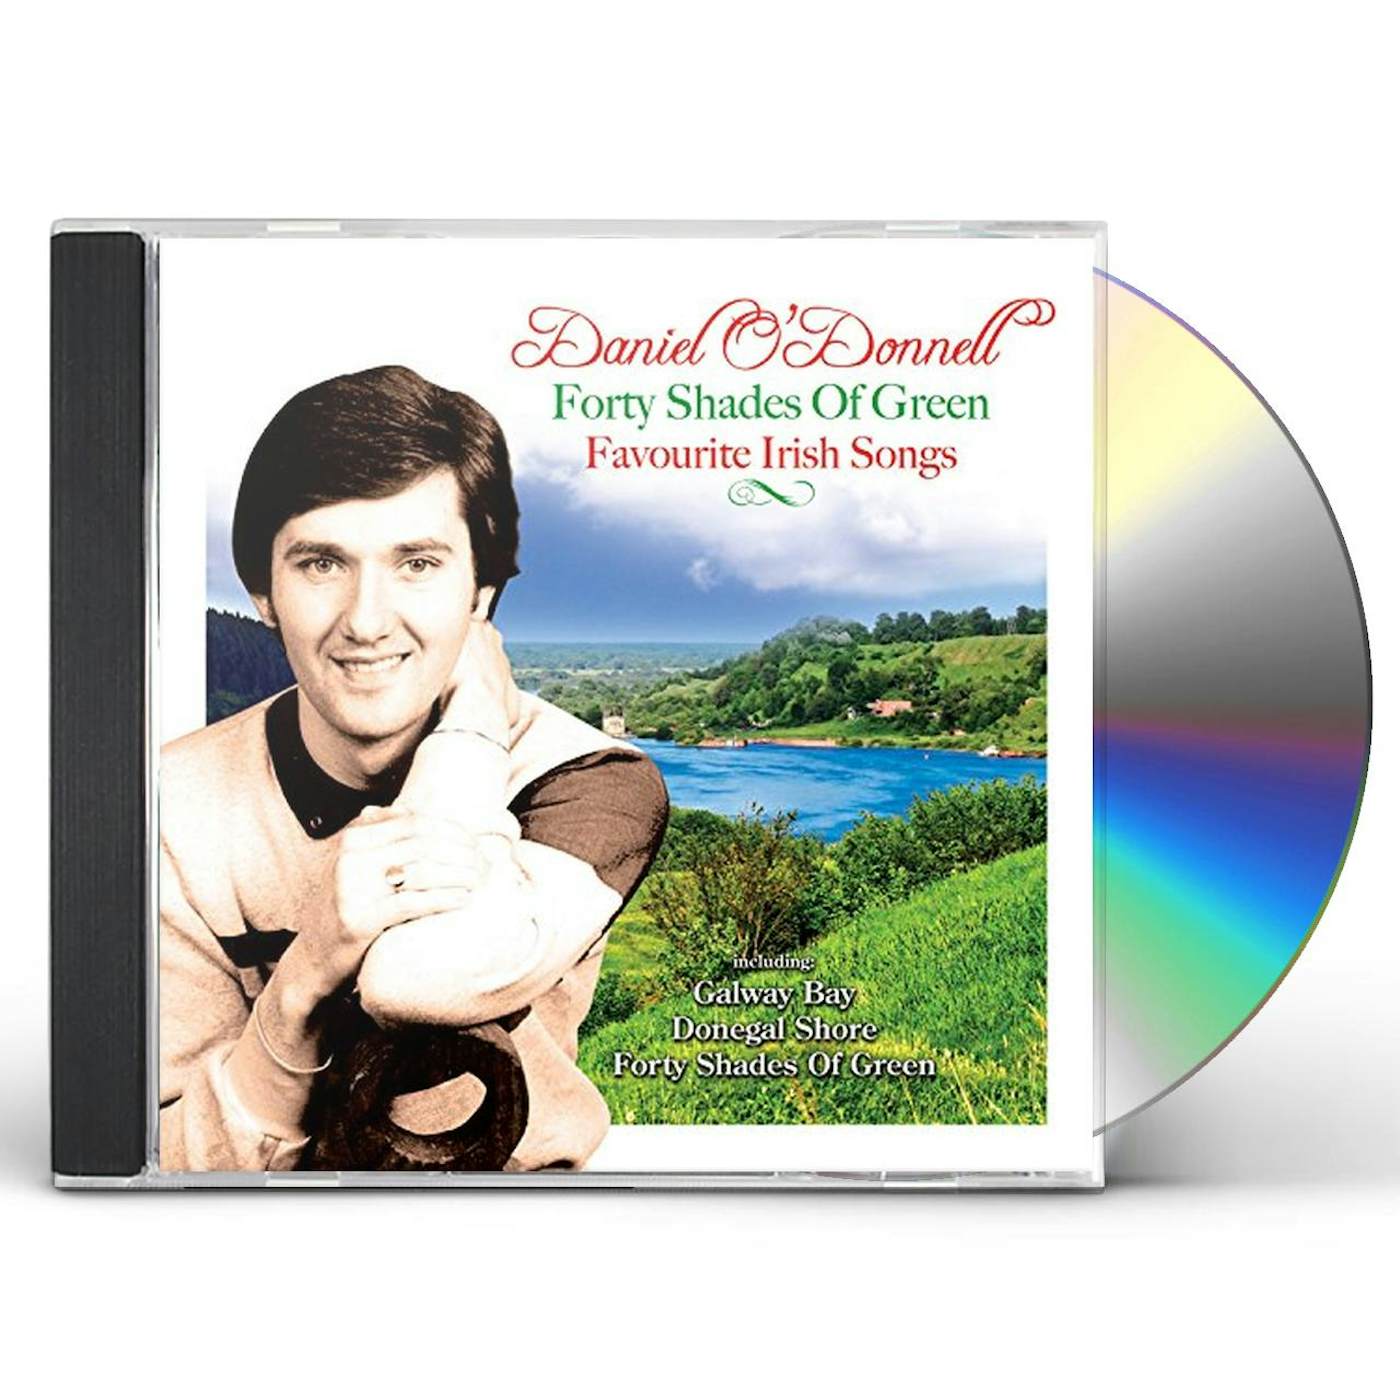 Daniel O'Donnell FORTY SHADES OF GREEN: FAVOURITE IRISH SONGS CD